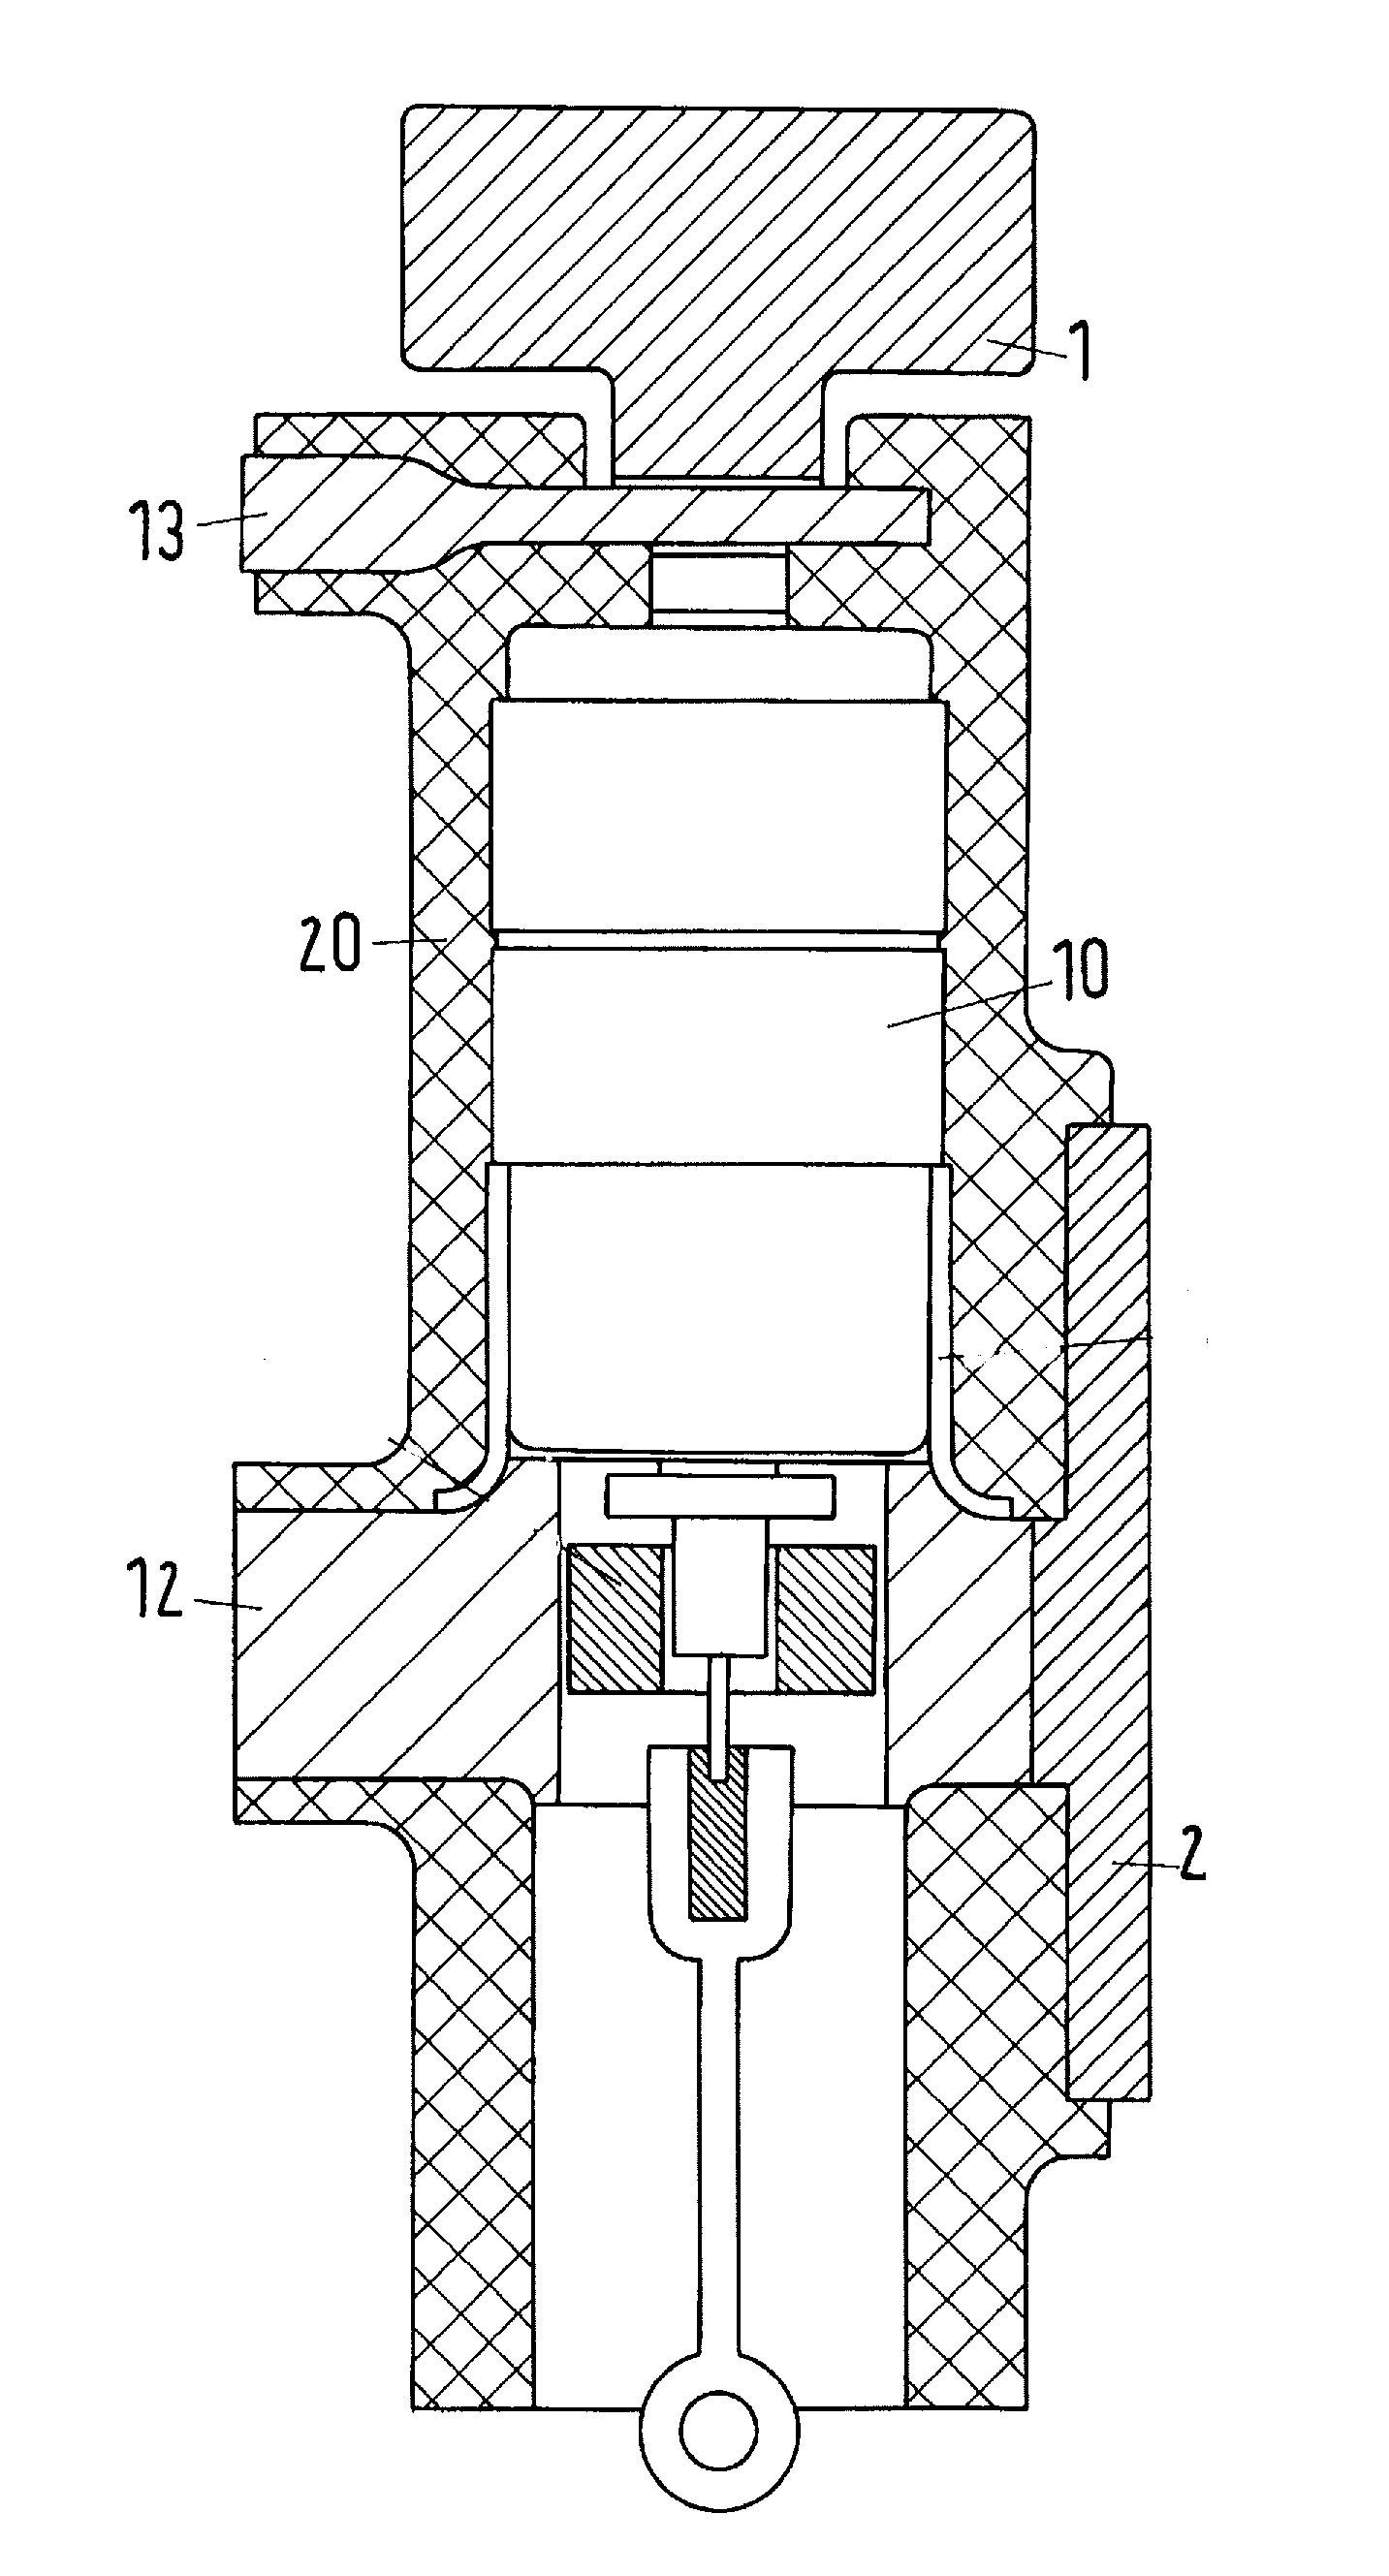 Pole part of a medium-voltage or high-voltage switch gear assembly, and method for its production